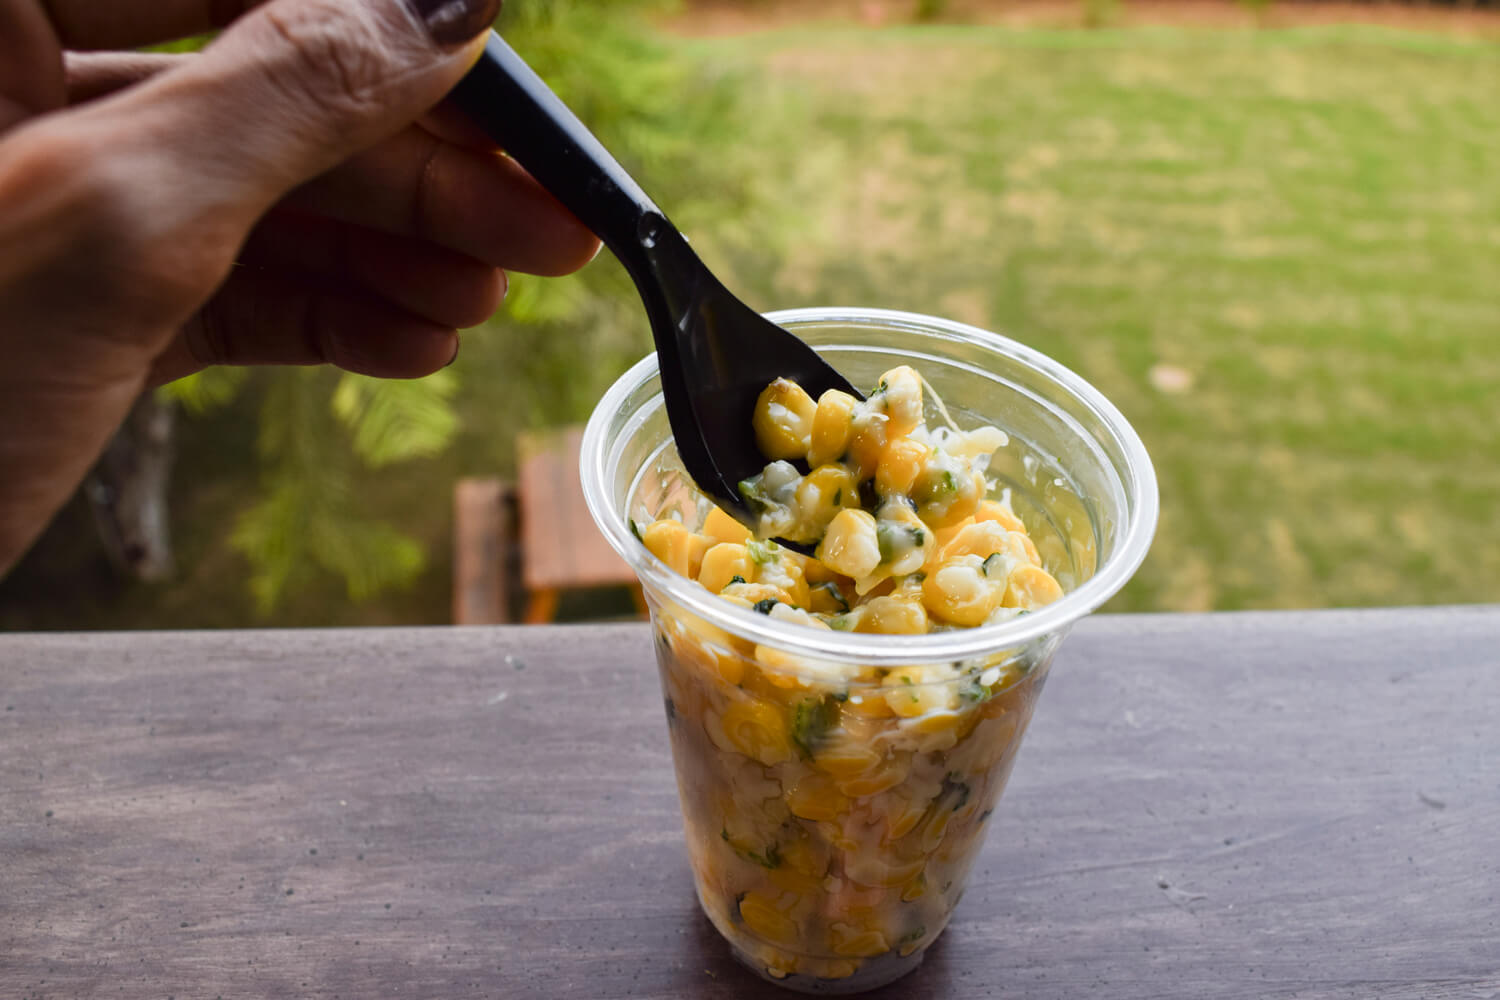 sweet corn in a cup